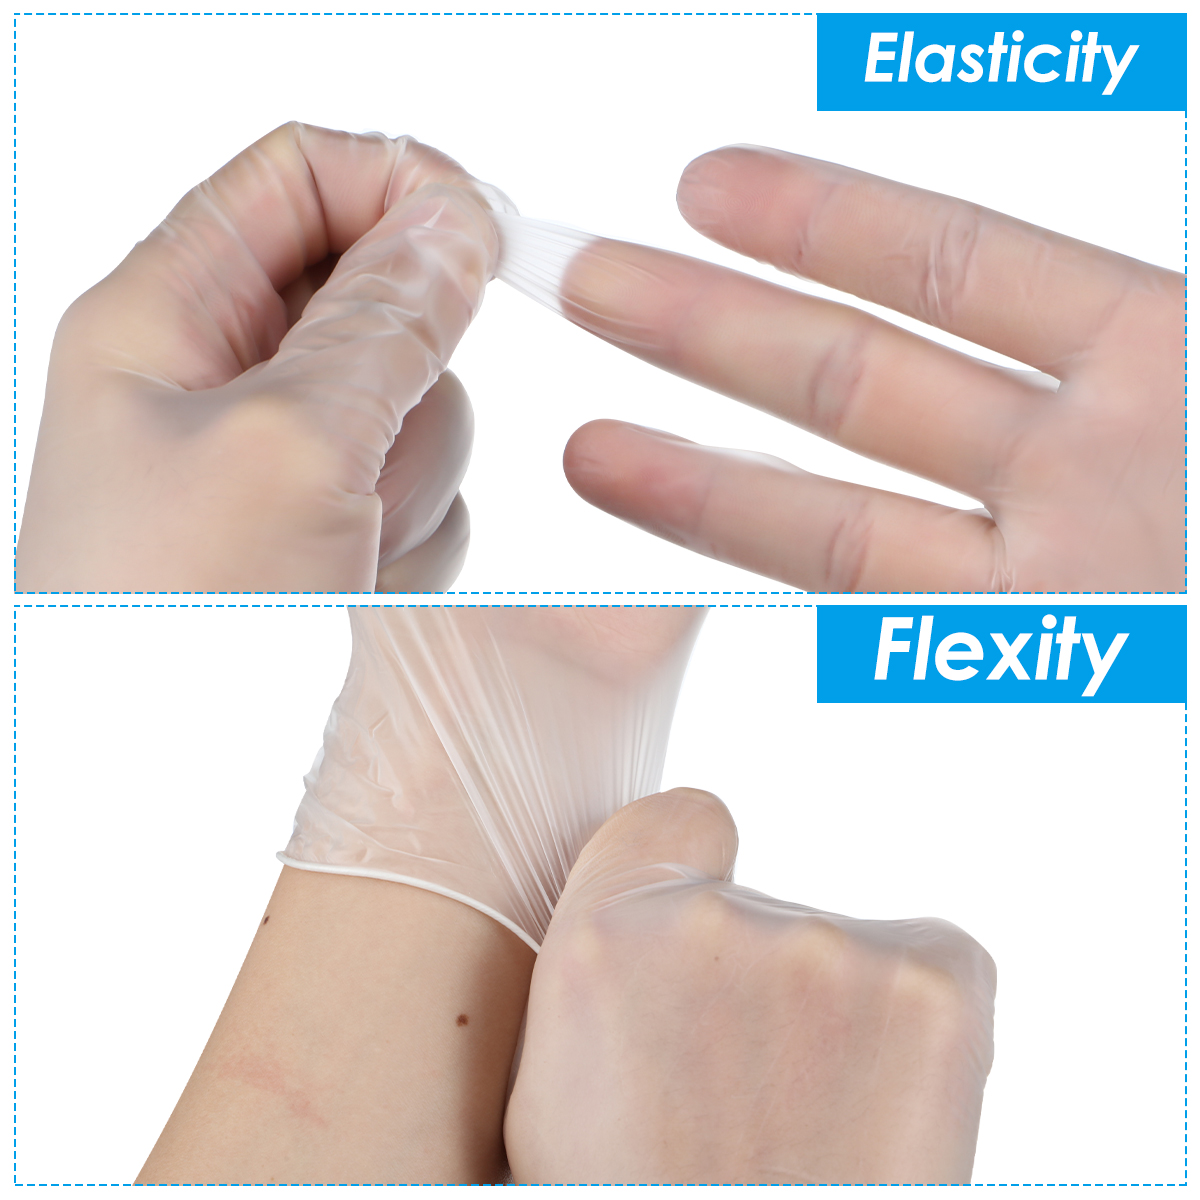 100-Pcs-Disposable-Latex-Free-Rubber-Gloves-Powder-Free-for-Industrial-Food-Service-Cleaning-and-Mor-1774256-5